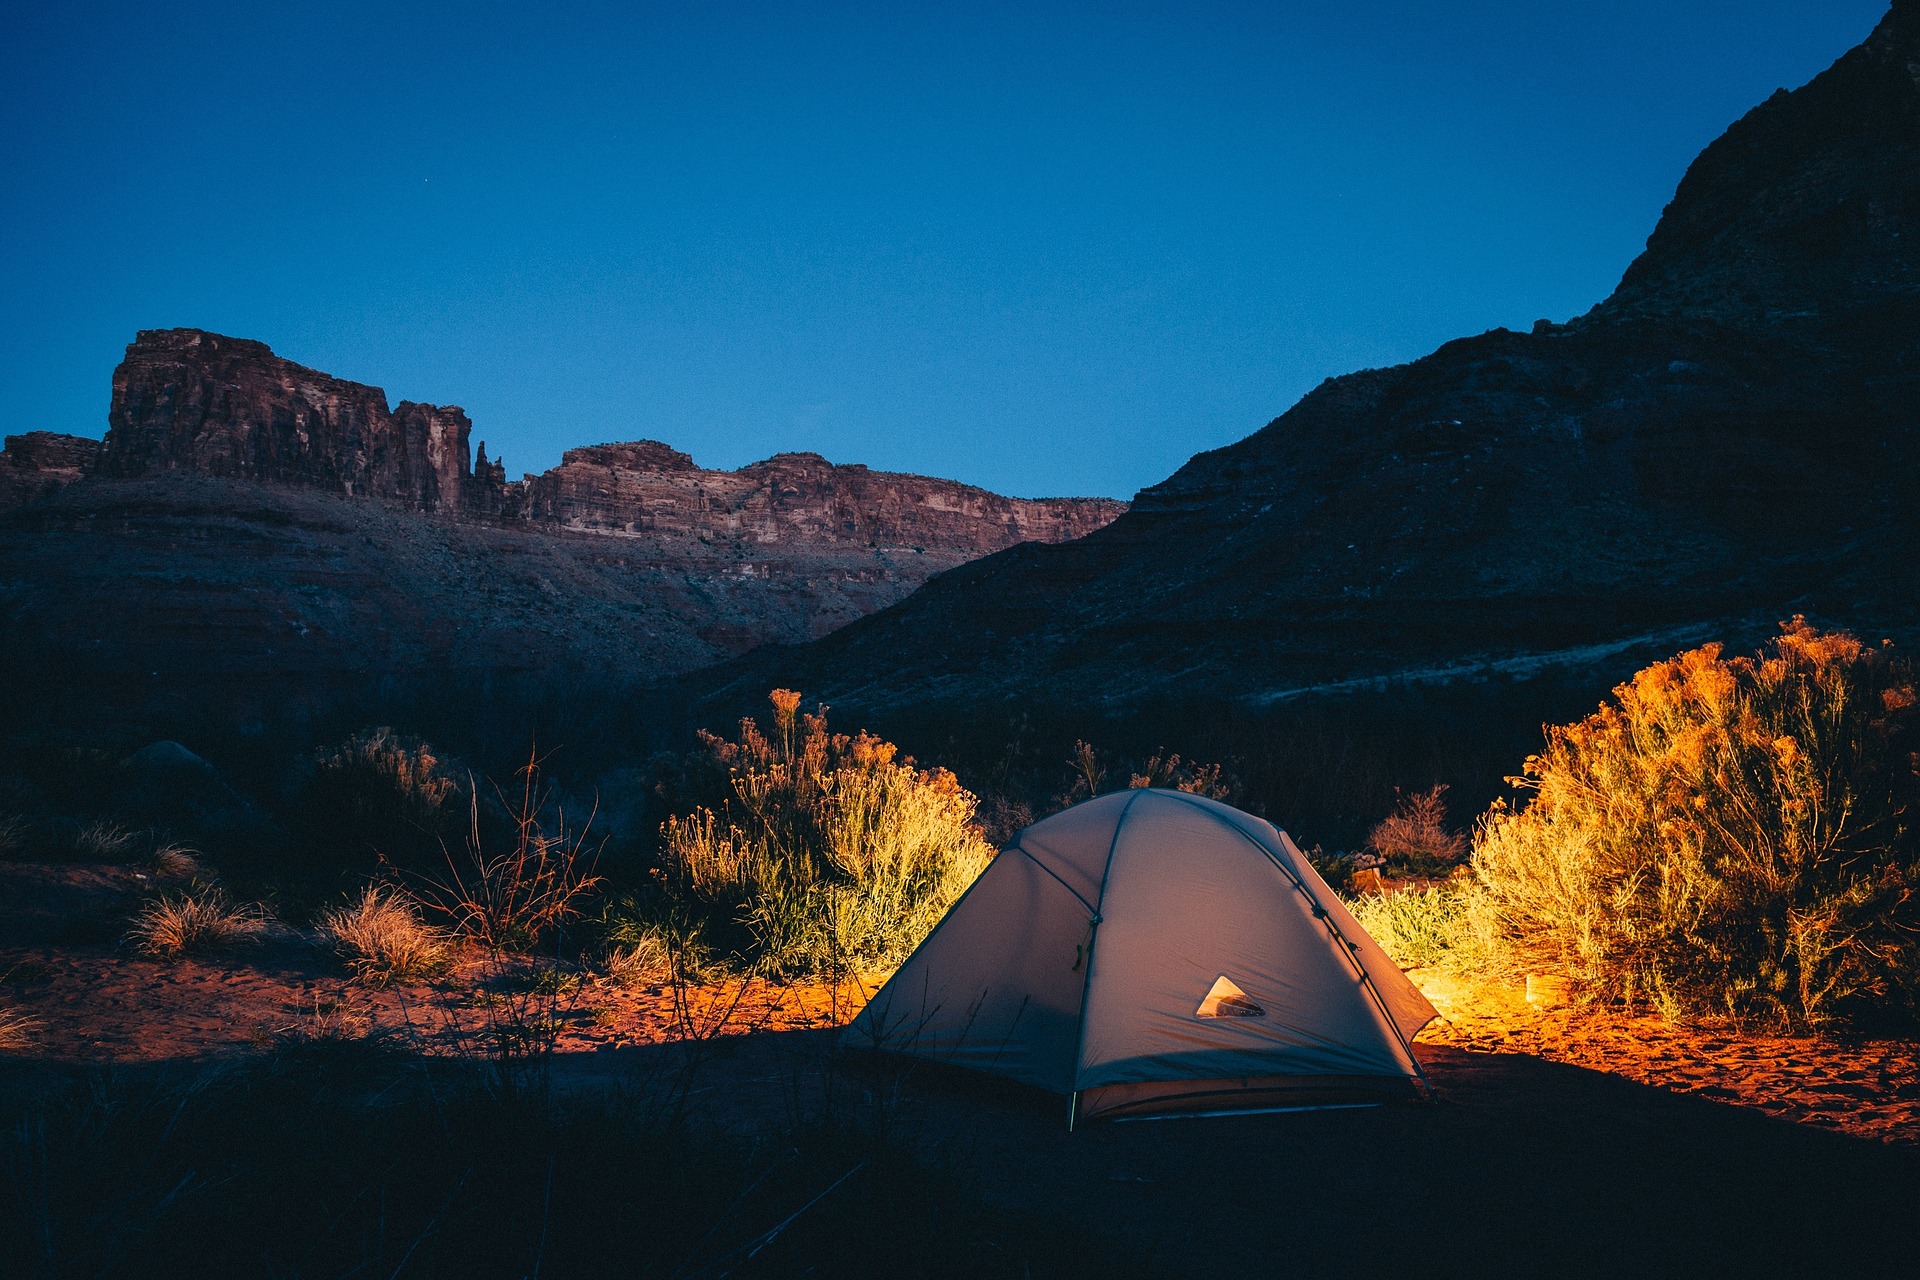 Keep the bugs away while camping by selecting the right location.